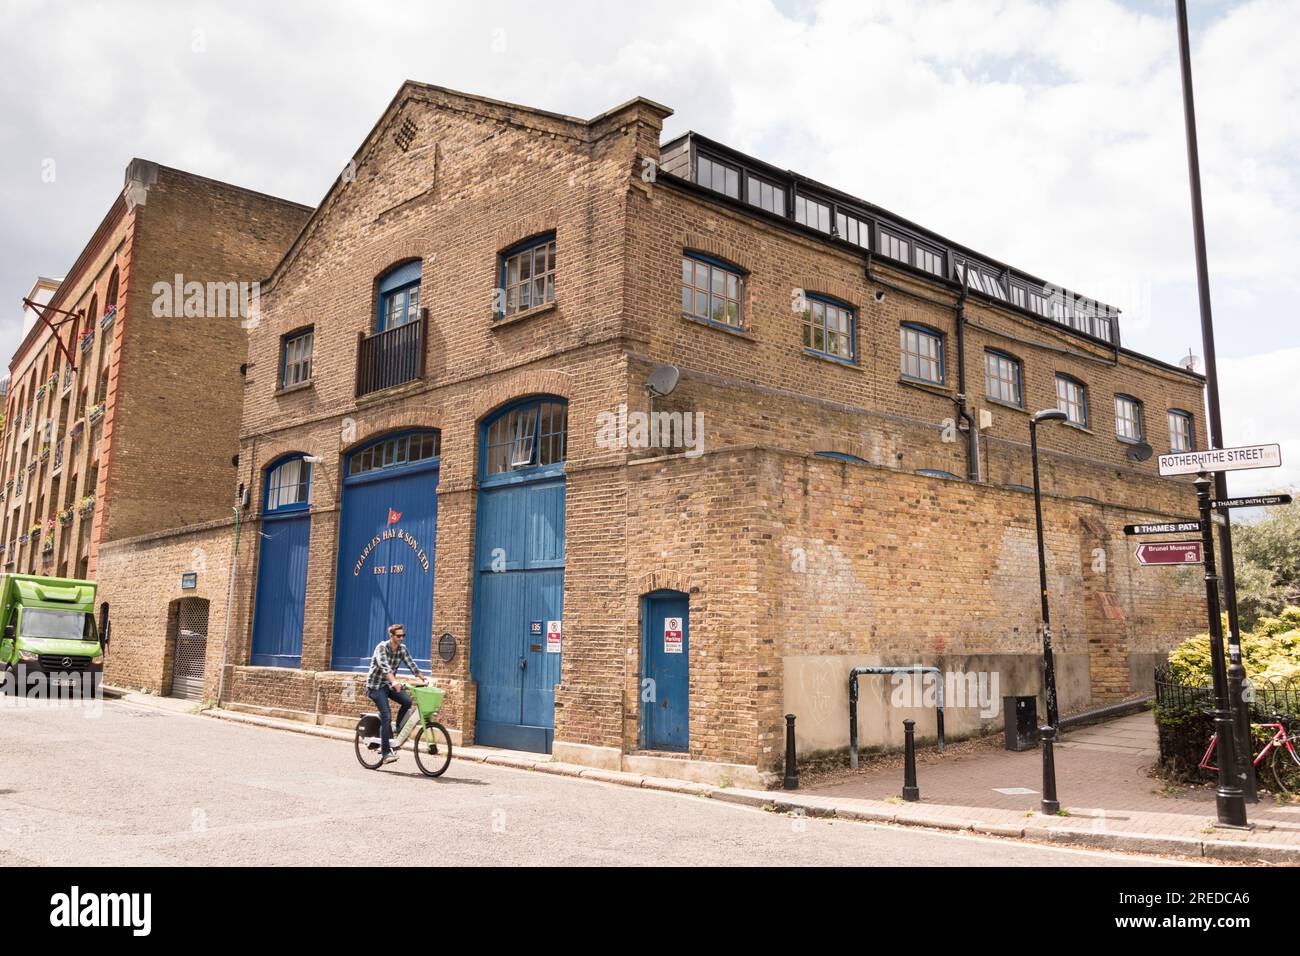 Charles Hay and Son, Rotherhithe Street, Rotherhithe Street, London, SE16, England, U.K. Stock Photo